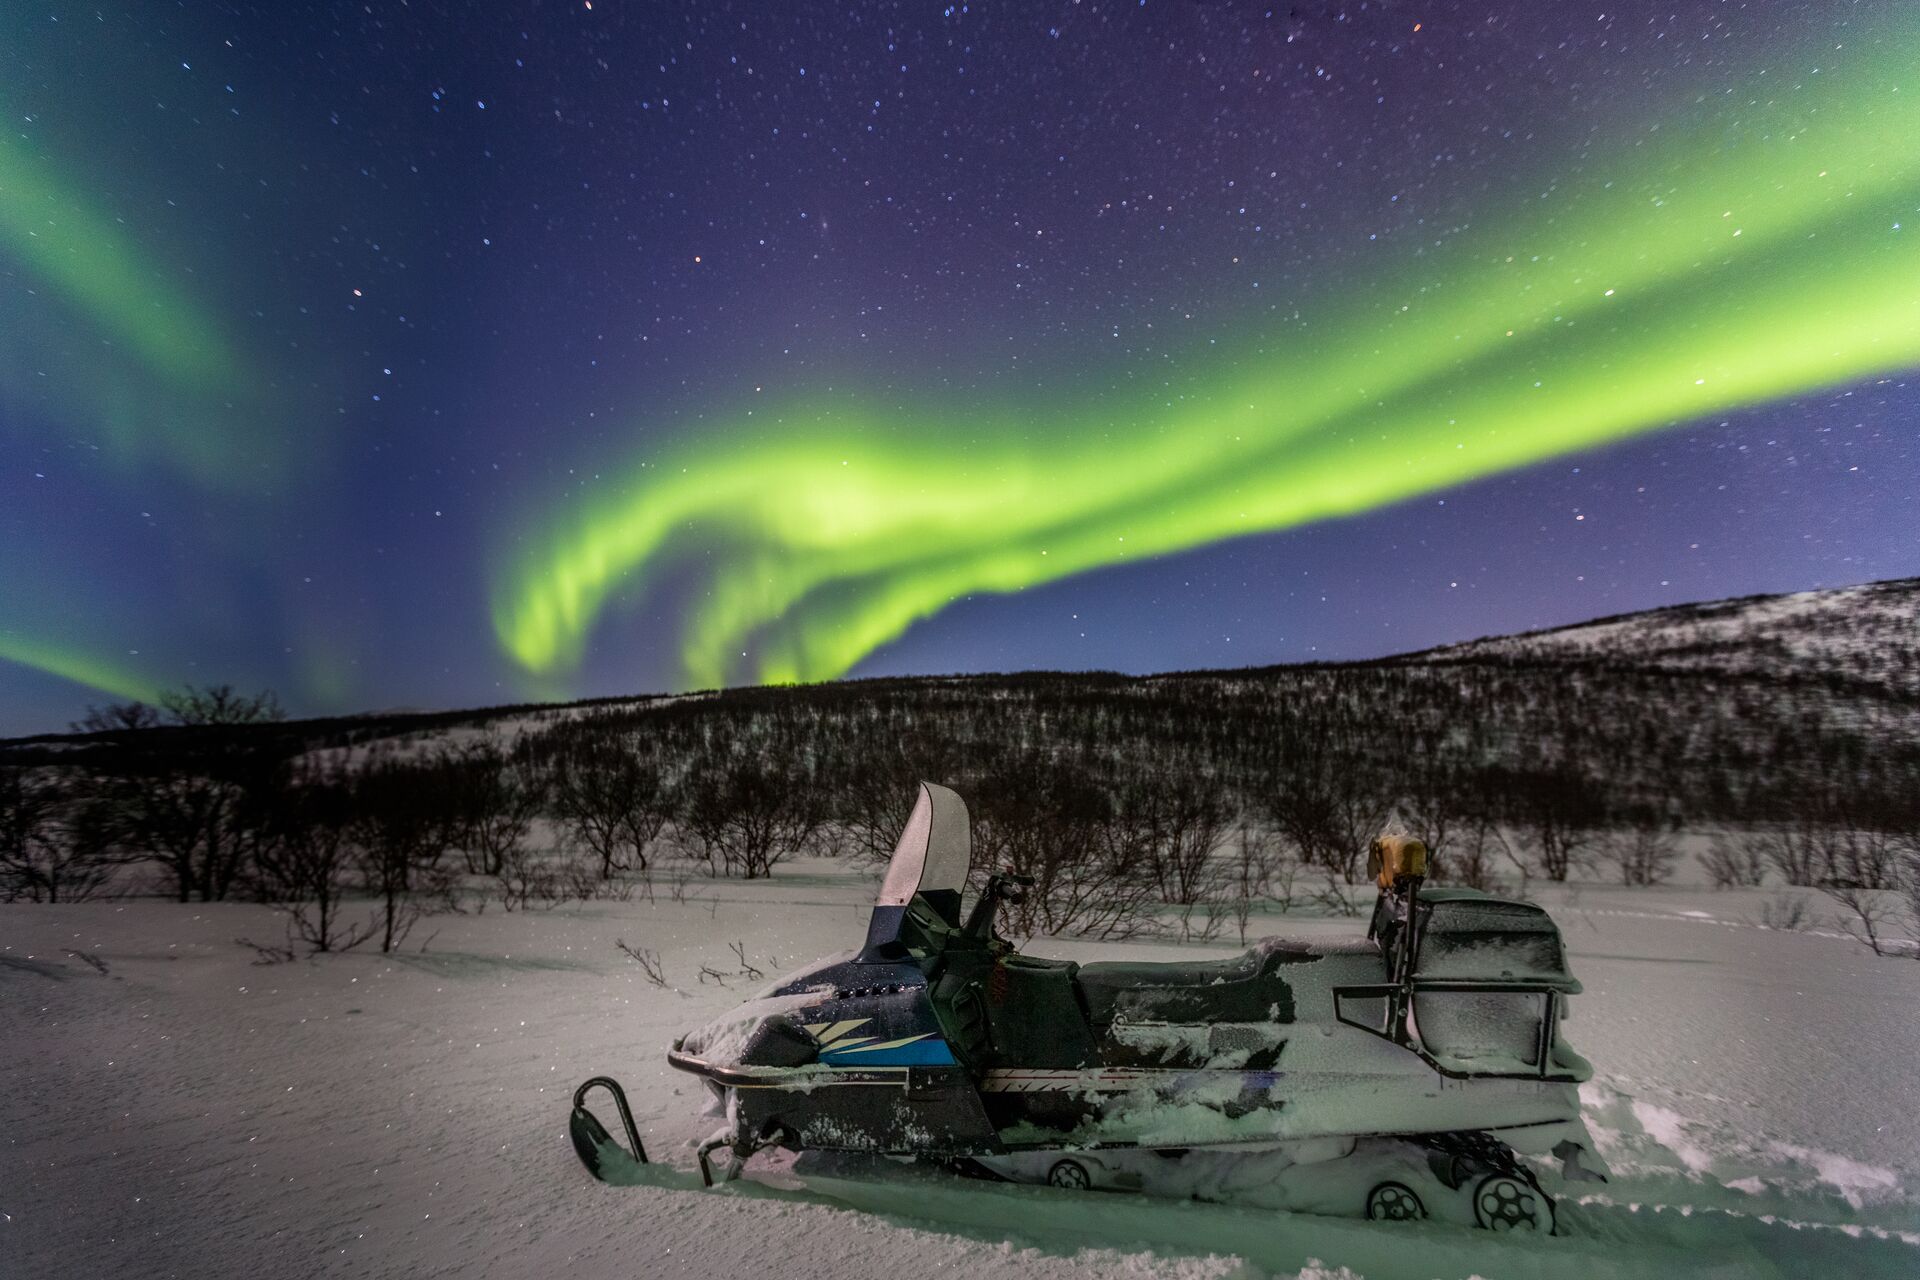 three green northern lights lines track across the purple night sky, with show and a snowmobile in the foreground